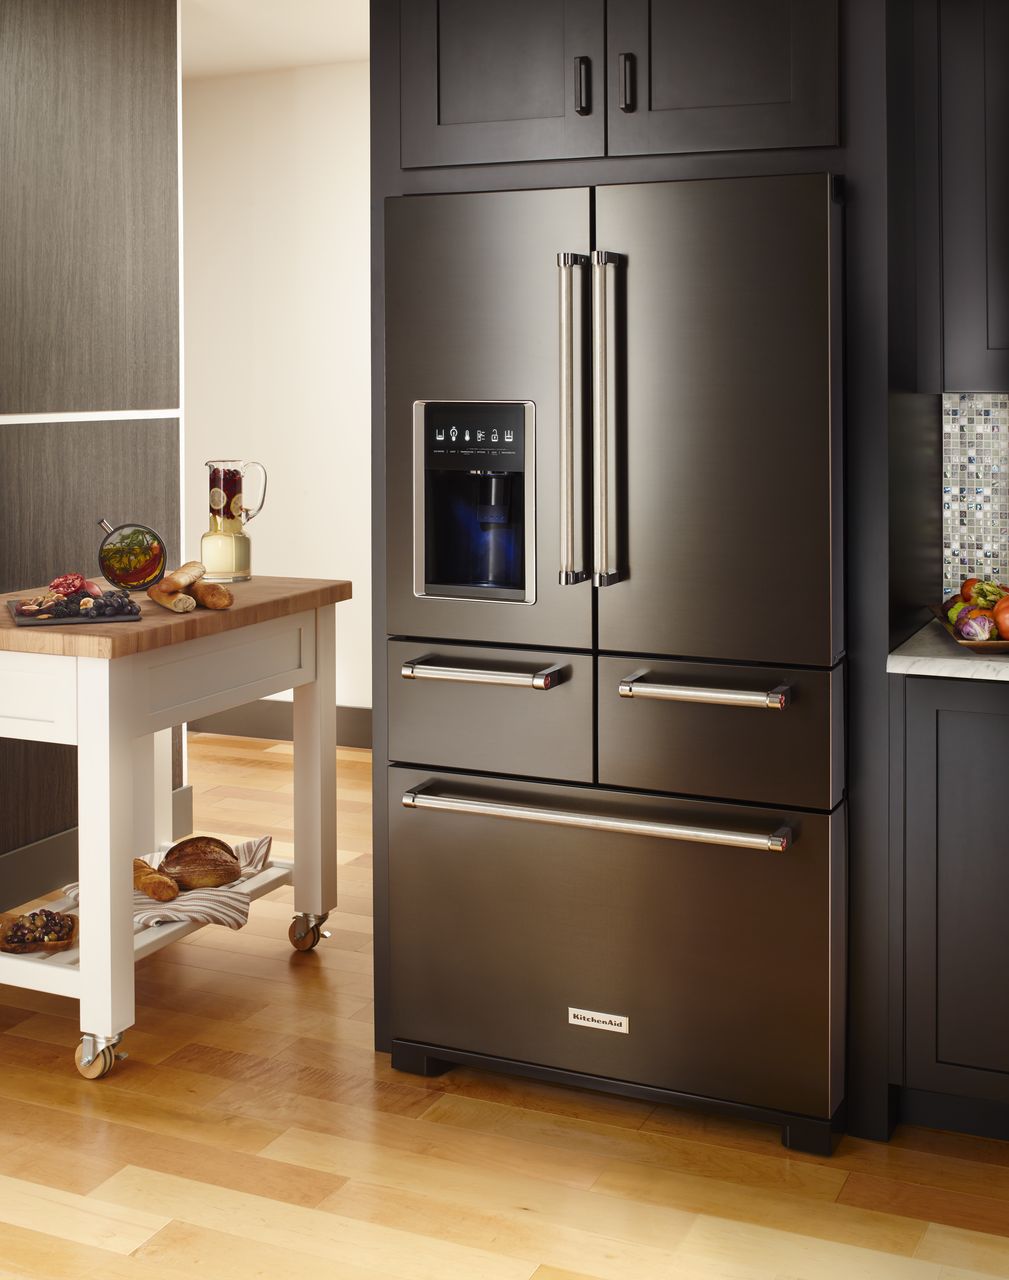 Black is where it's at in stainless steel appliances | Real Estate ...